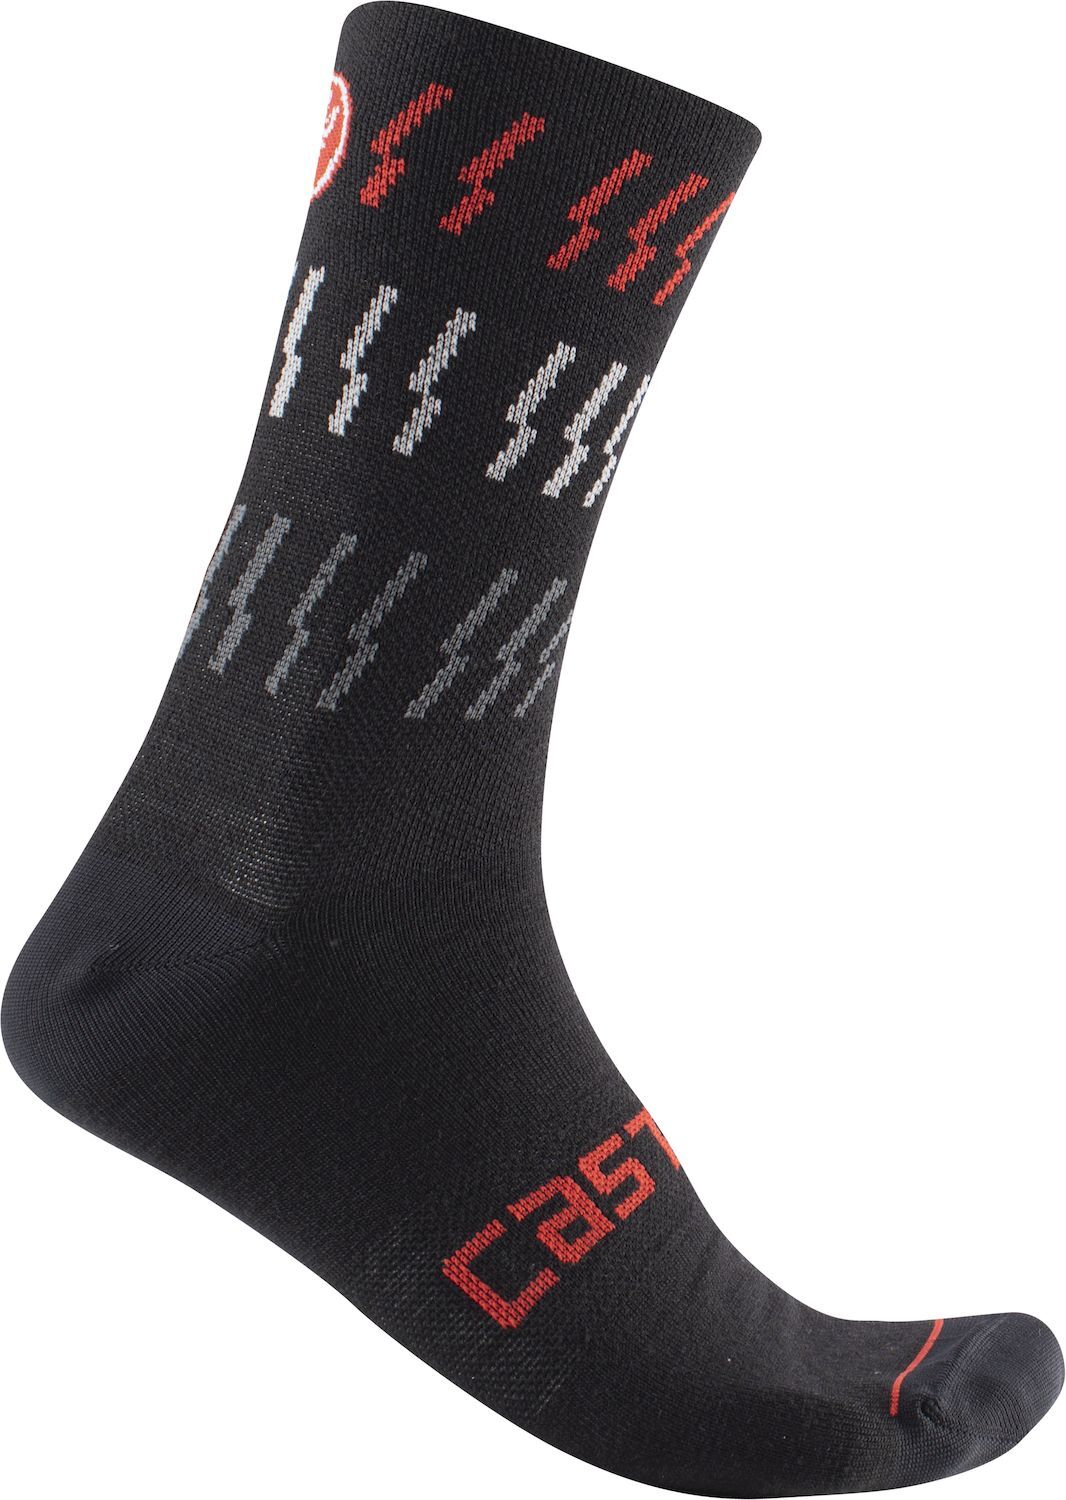 Castelli Mid Winter 18 - Calcetines ciclismo